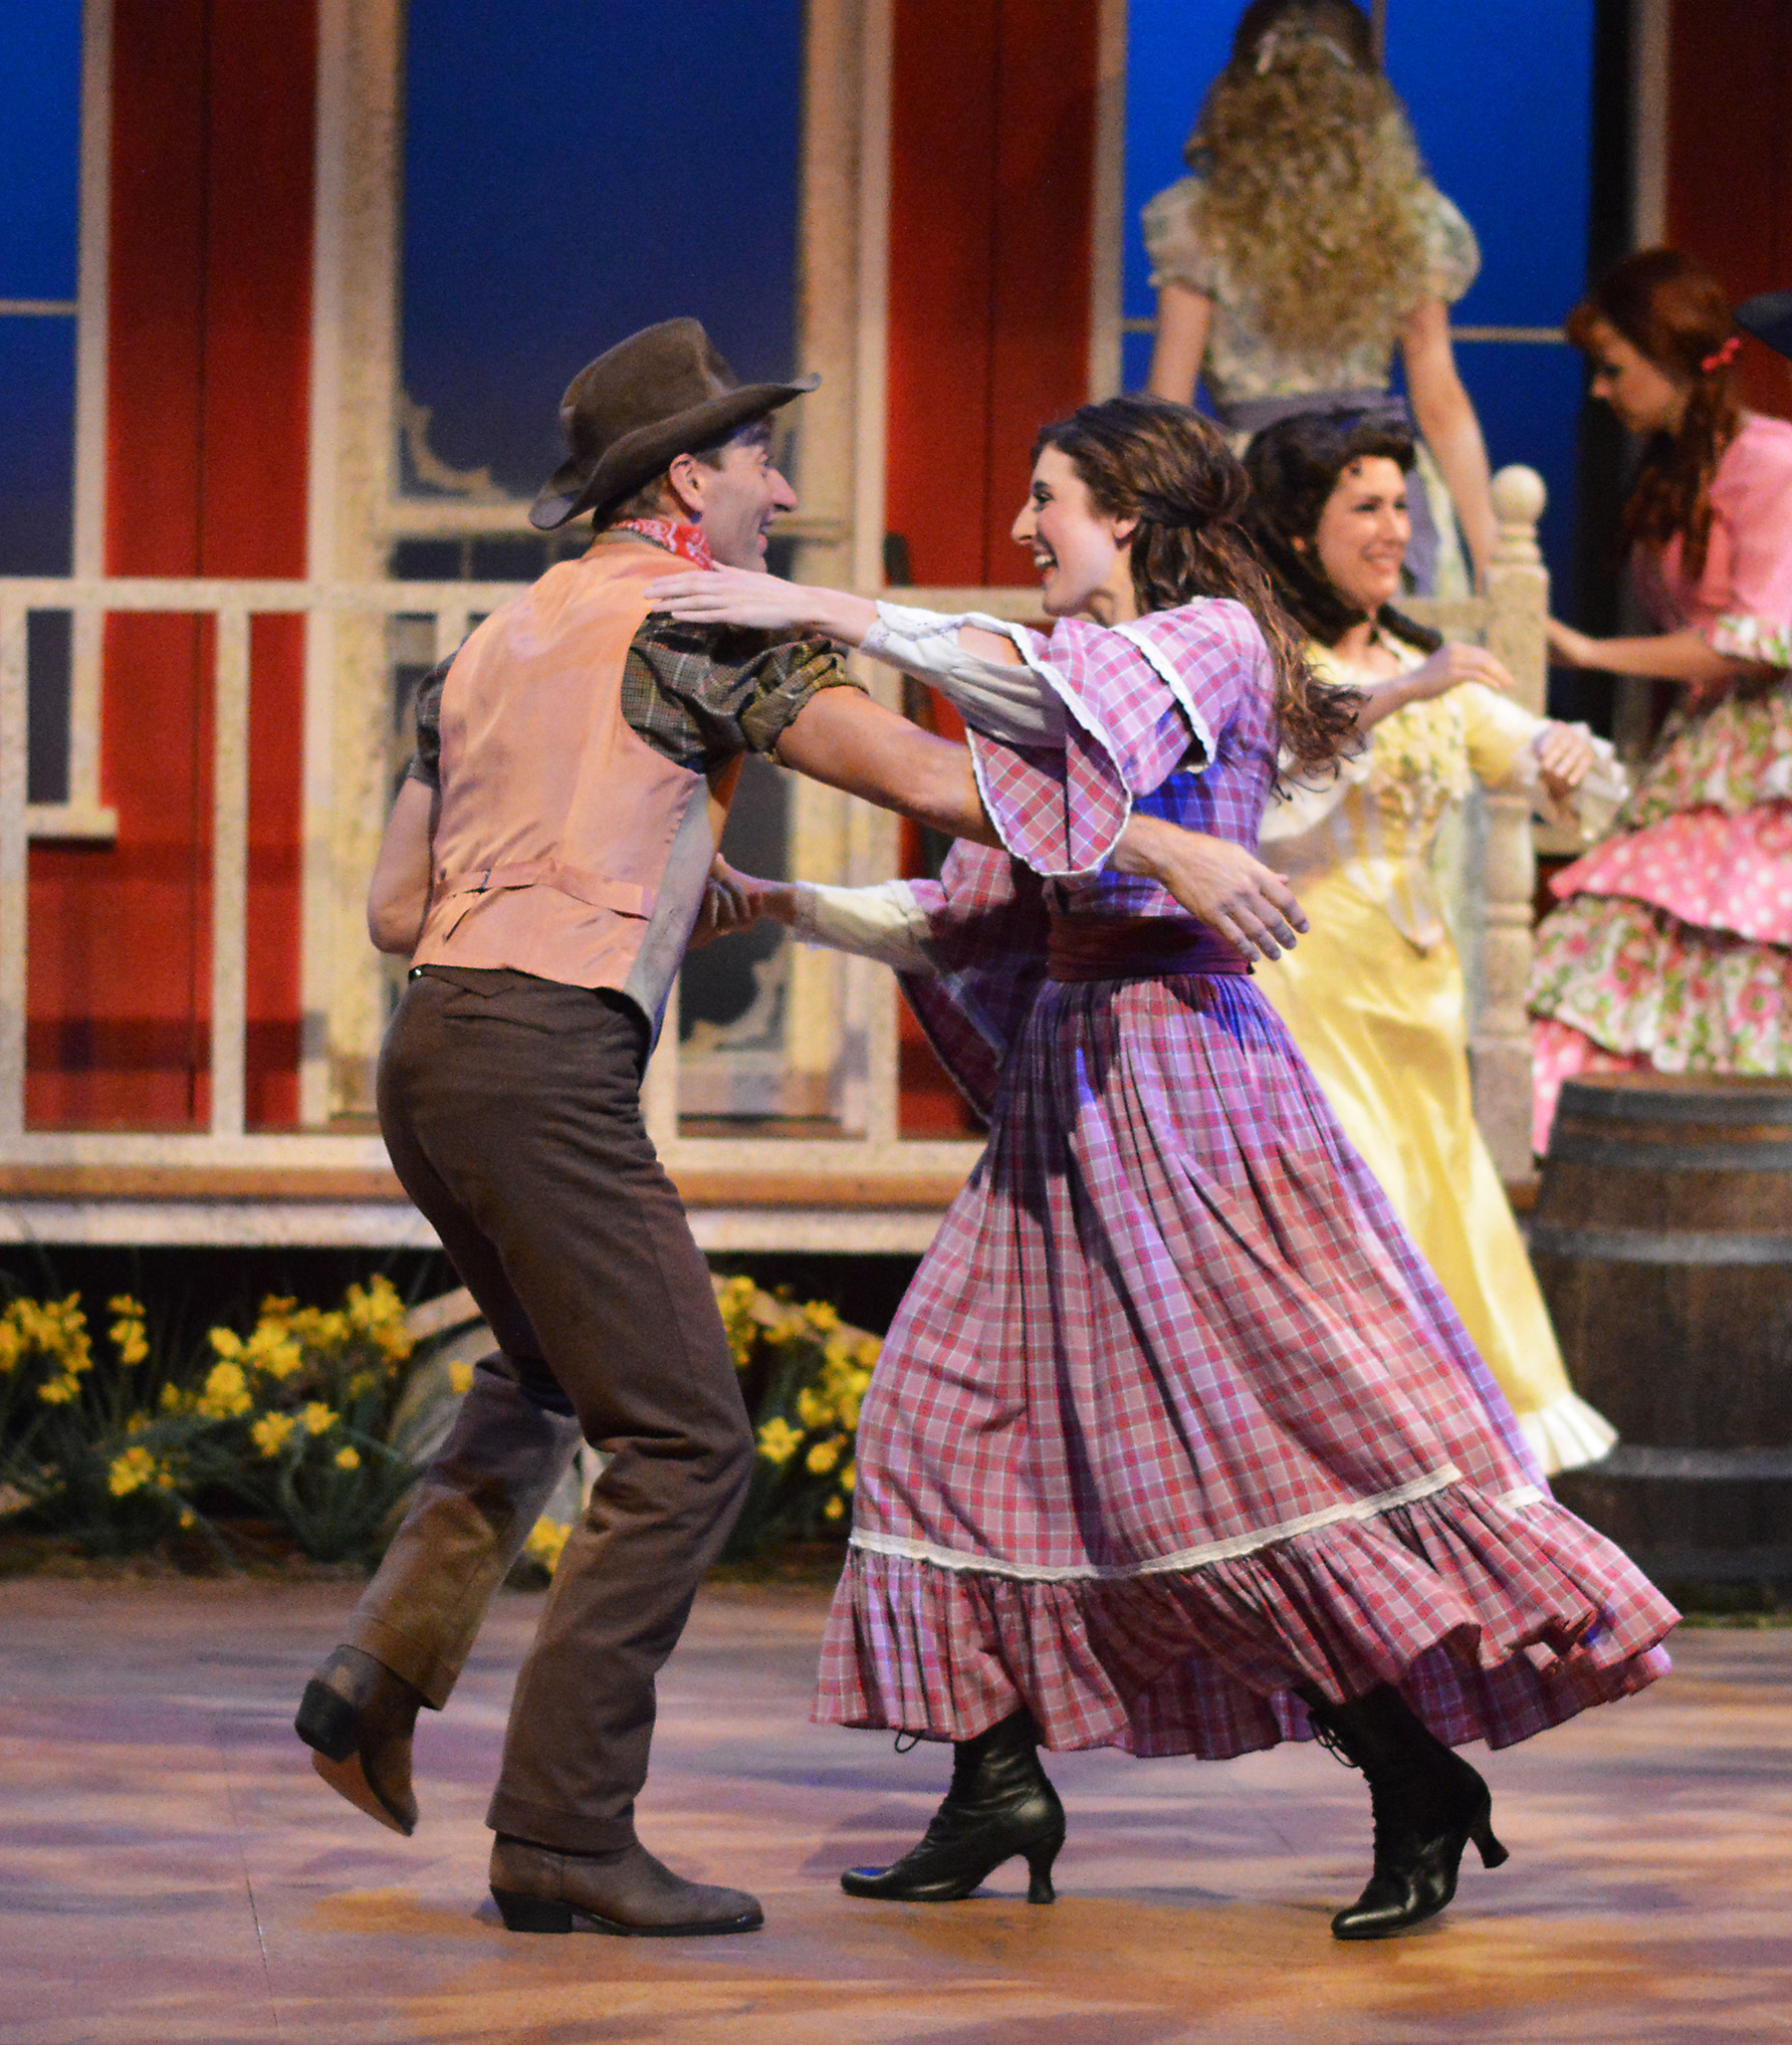 Anna Mae (played by Fishers resident Devan Mathias) dances during the box social in Beef & Boards Dinner Theatre’s current production of Oklahoma! (Submitted photo)